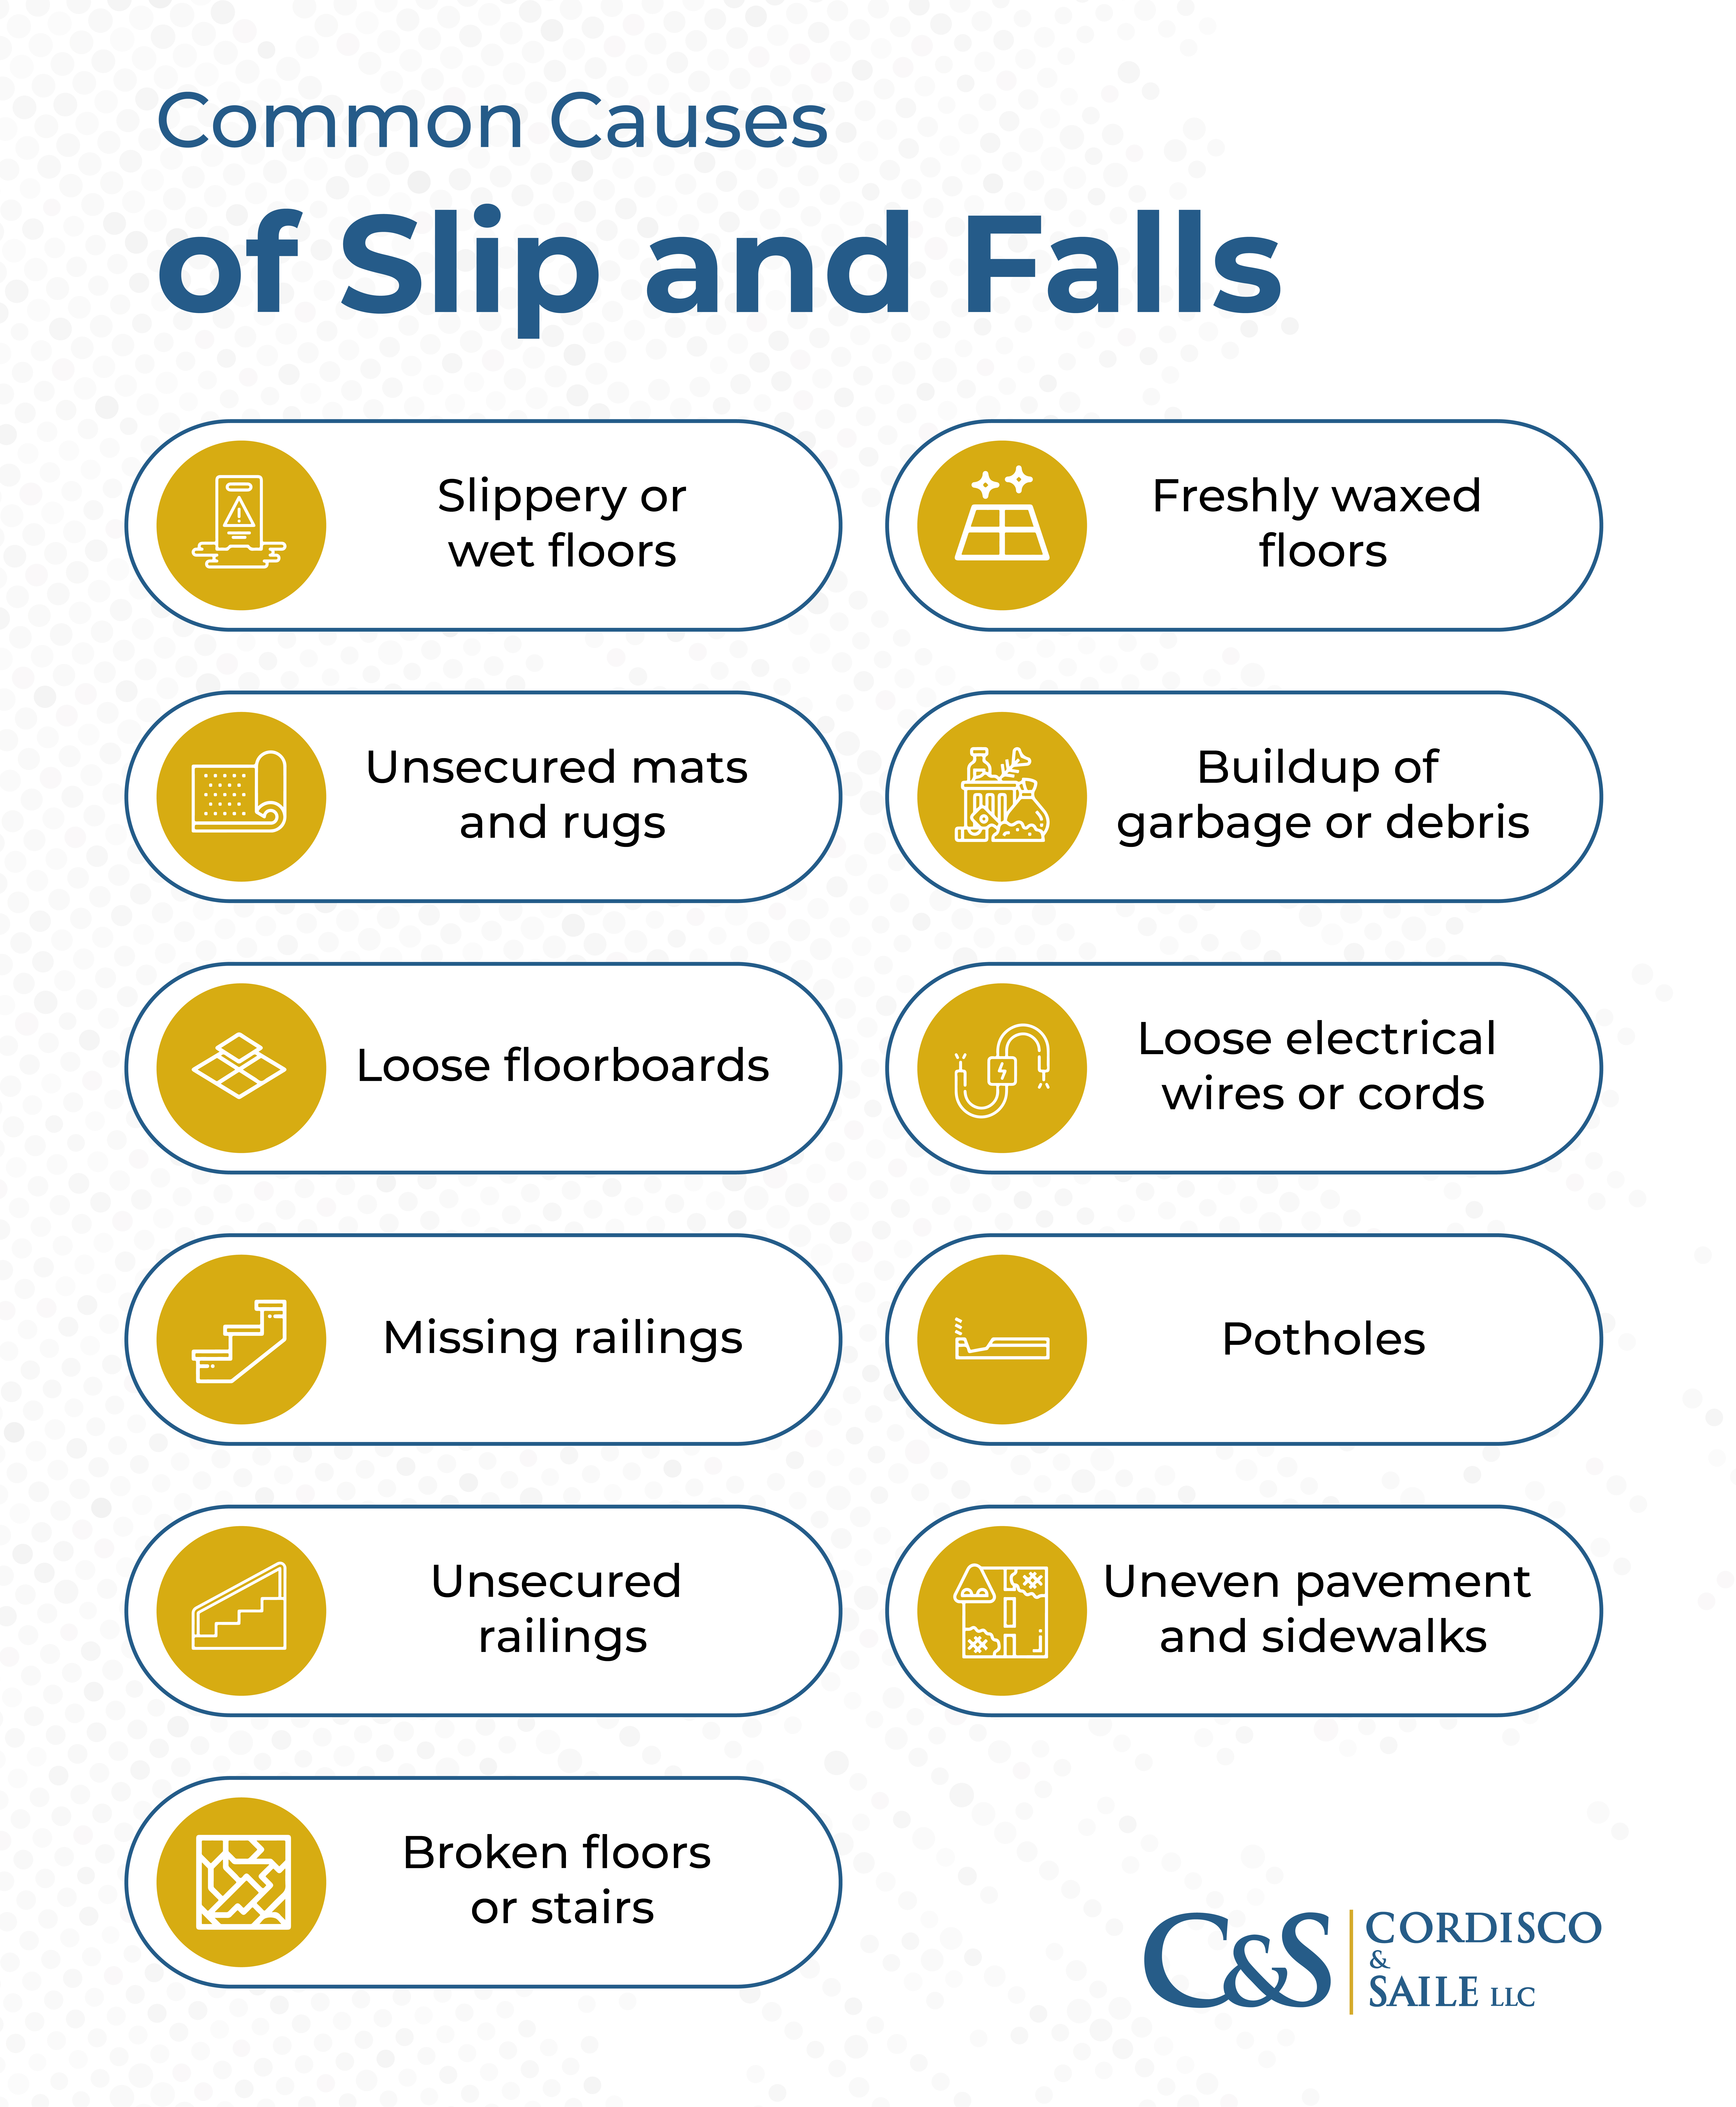 Common Causes of Slip and Falls infographic